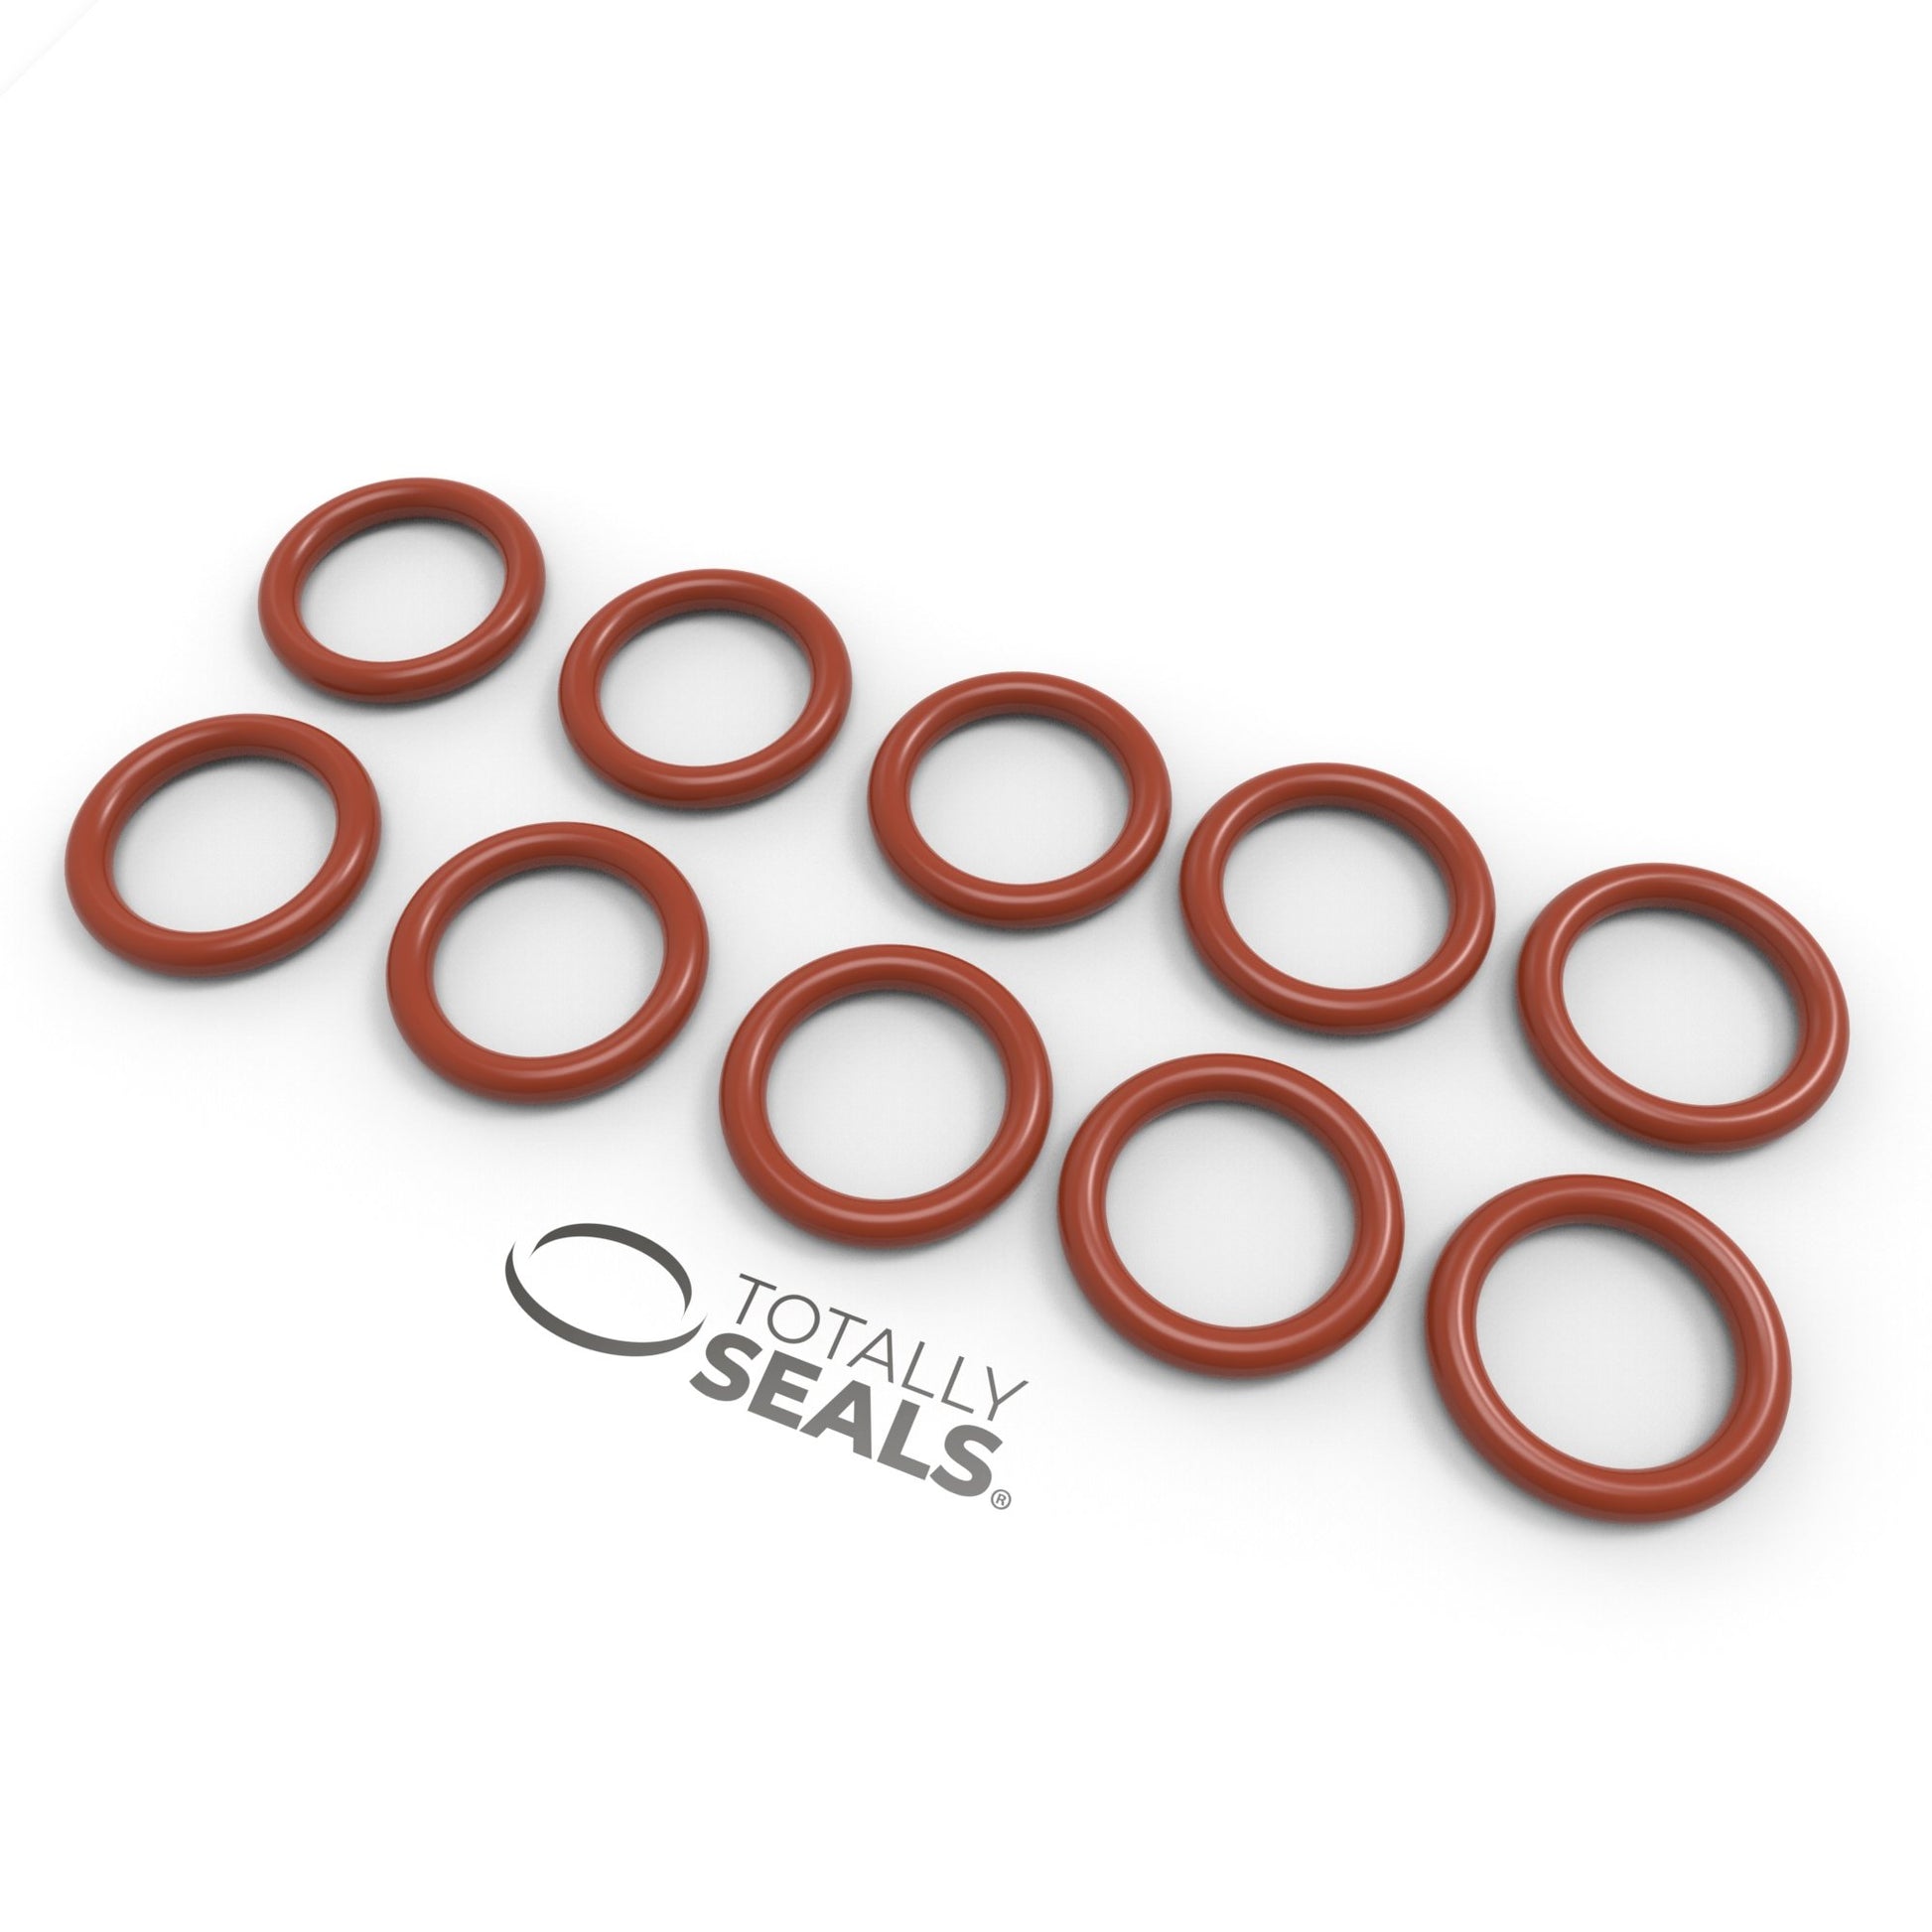 17mm x 2.5mm (22mm OD) Silicone O-Rings - Totally Seals®